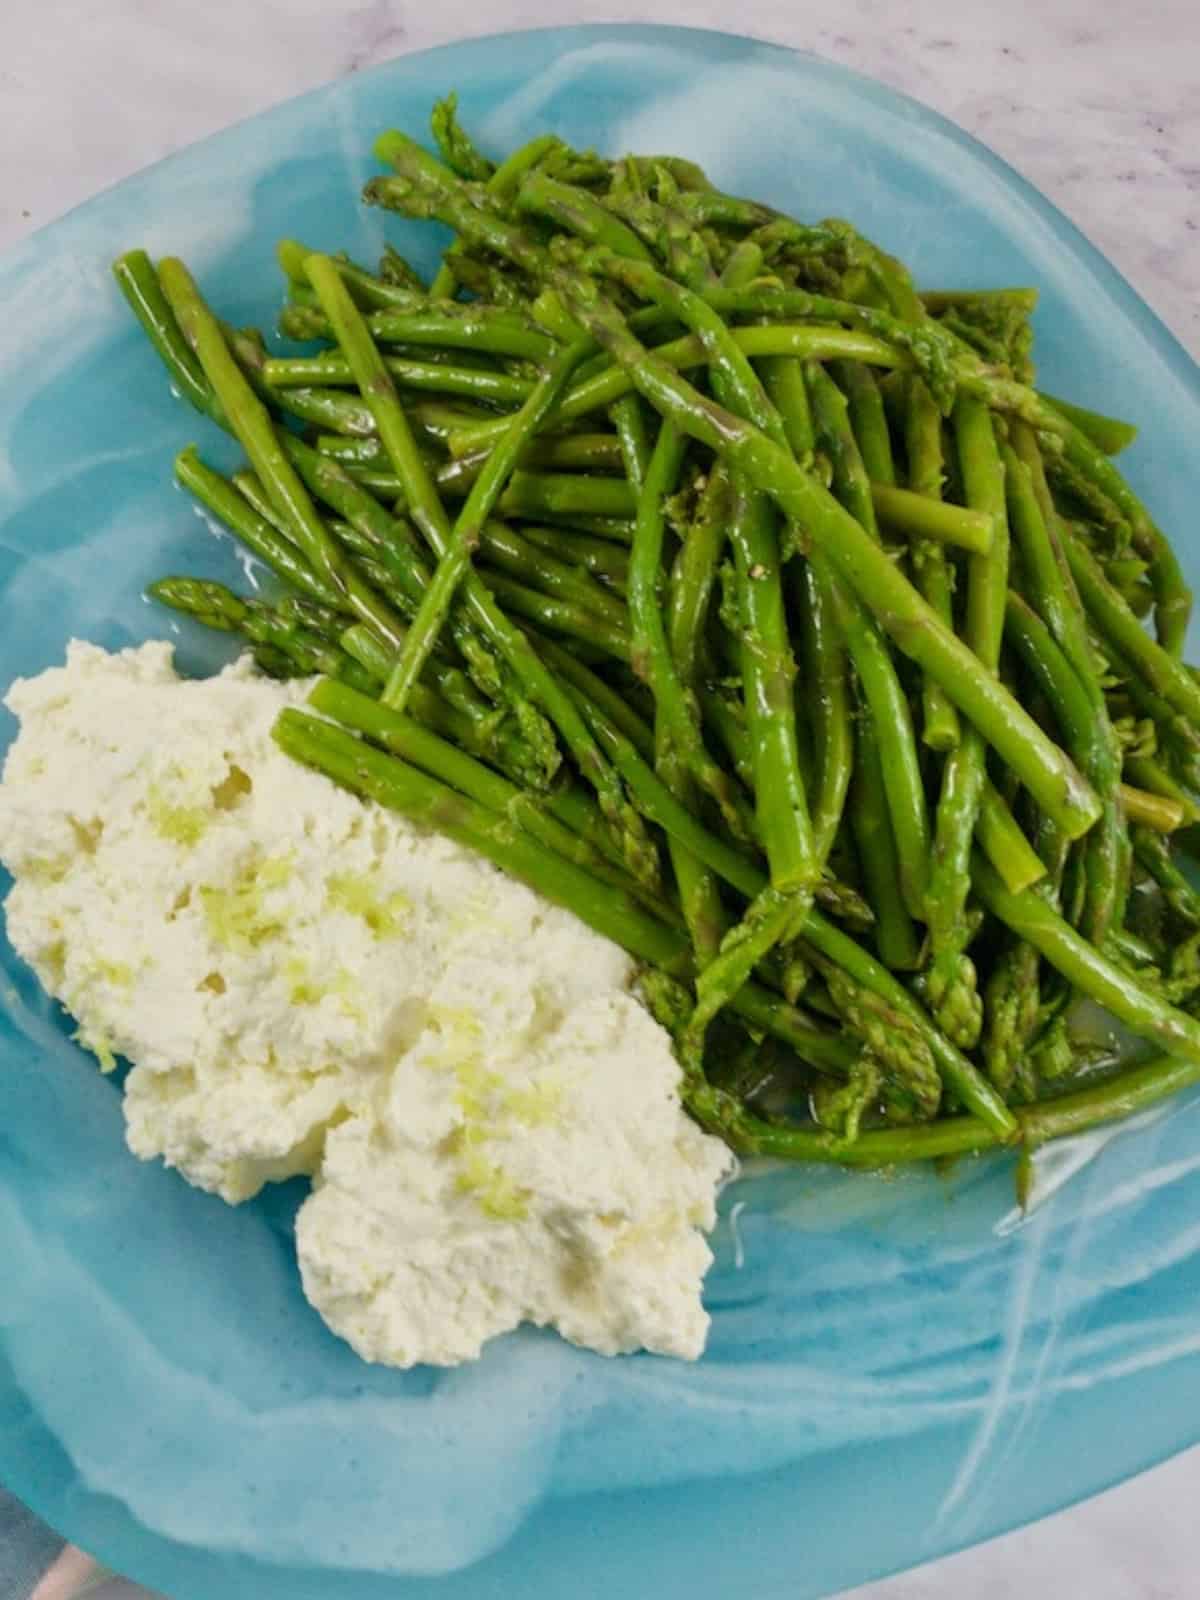 CLOSE-UP OF BABY ASPARAGUS SALAD